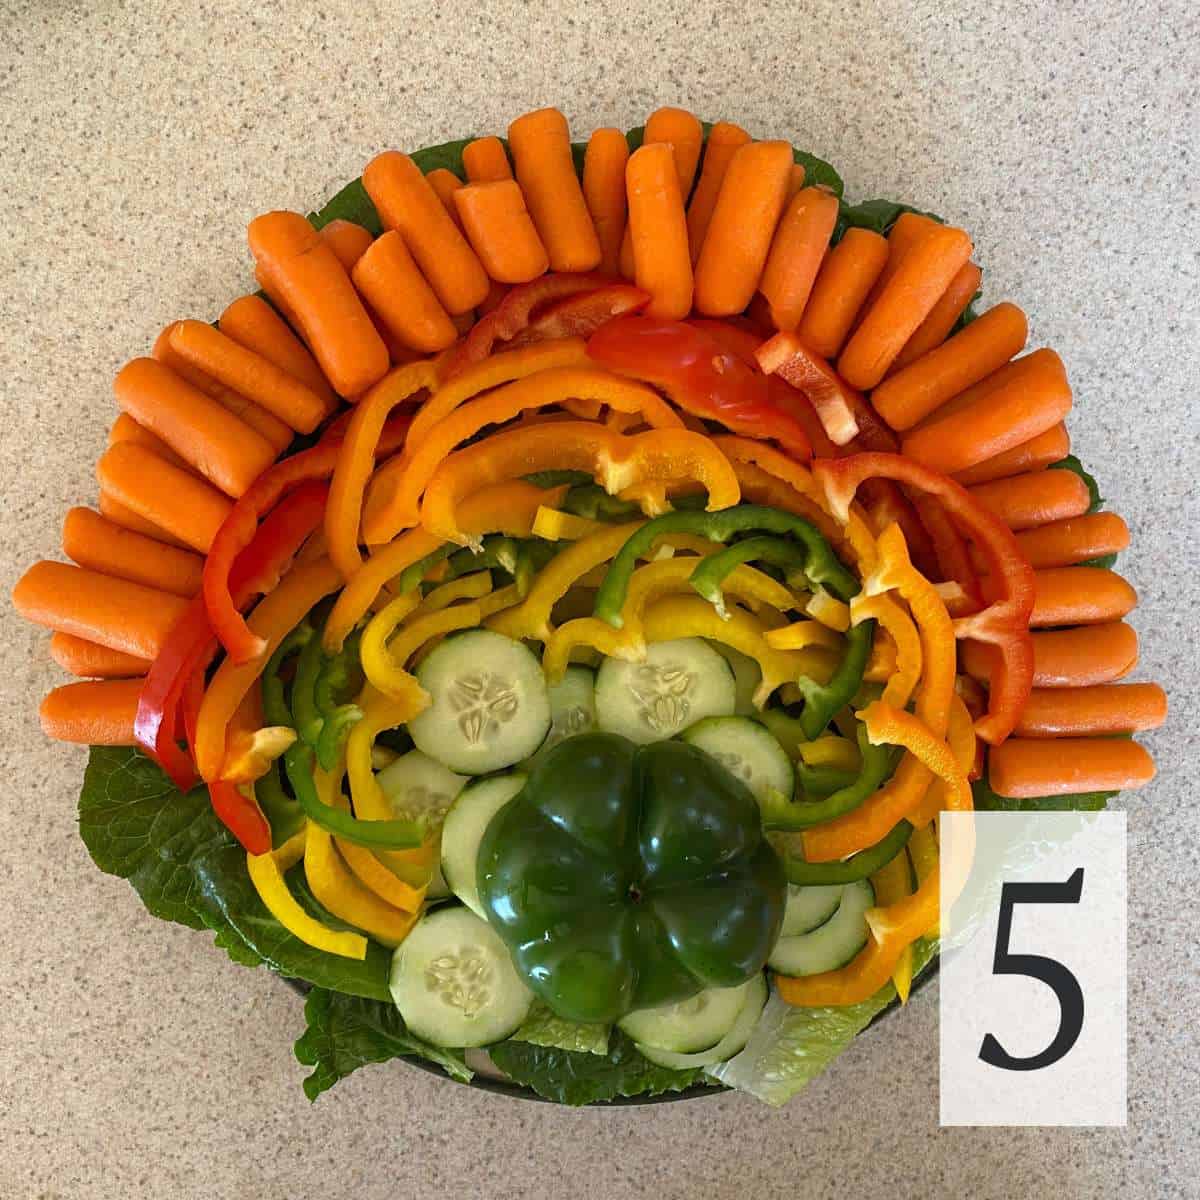 Cucumbers. bell peppers, and baby carrots arranged on a round platter.